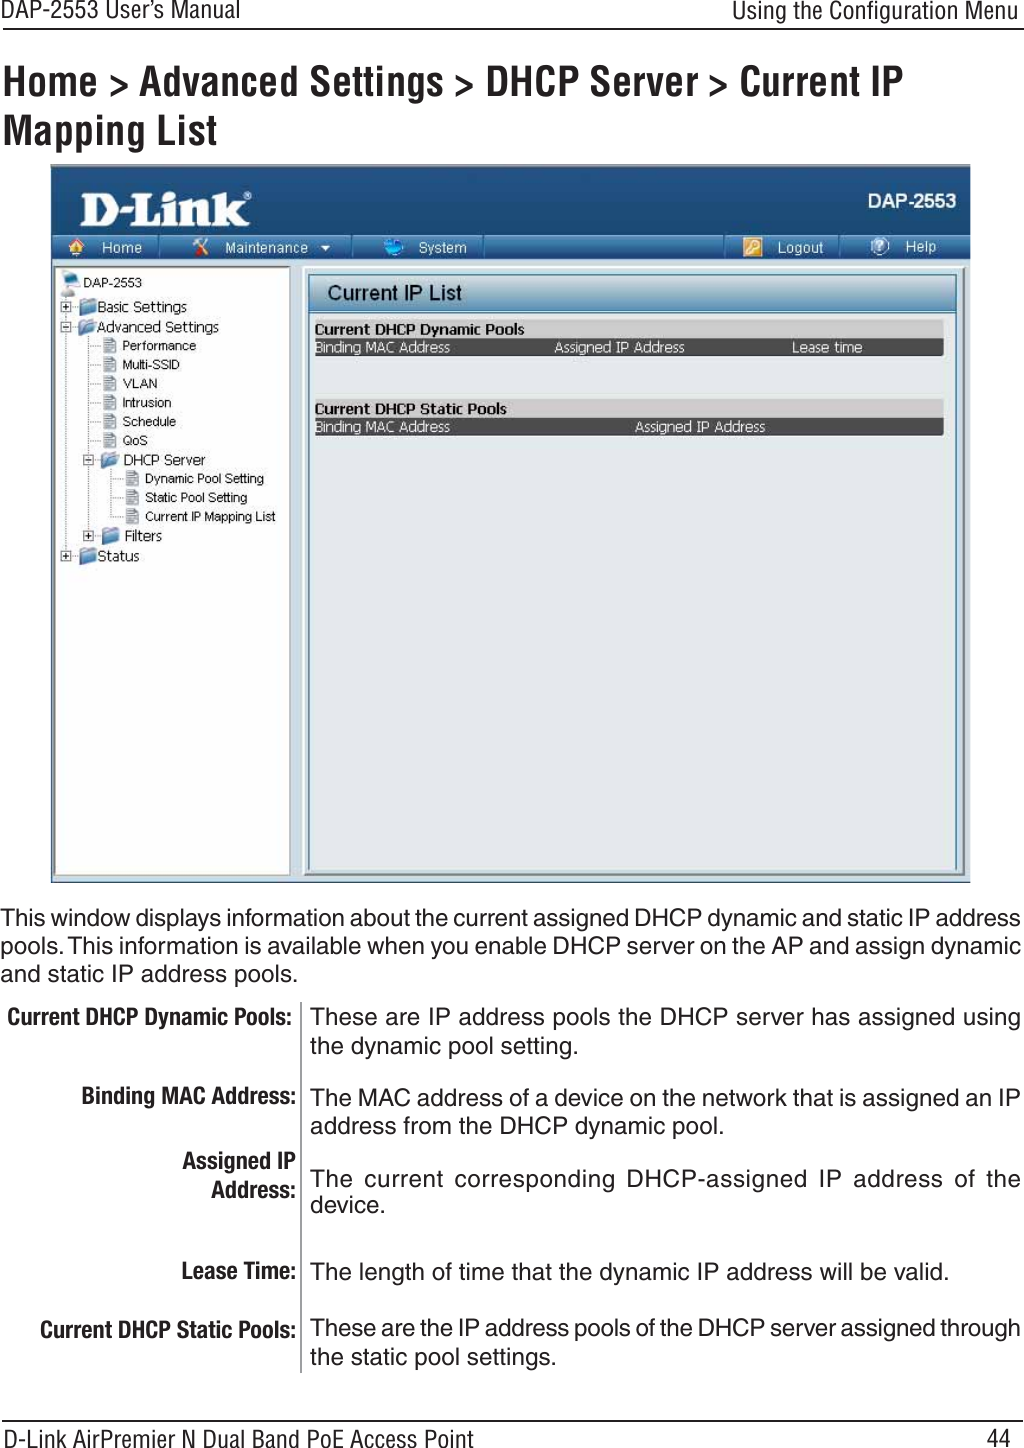 44DAP-2553 User’s ManualD-Link AirPremier N Dual Band PoE Access PointUsing the Conﬁguration MenuHome &gt; Advanced Settings &gt; DHCP Server &gt; Current IP Mapping ListThese are IP address pools the DHCP server has assigned usingthe dynamic pool setting.This window displays information about the current assigned DHCP dynamic and static IP addresspools.This information is available when you enable DHCP server on the AP and assign dynamicand static IP address pools.Current DHCP Dynamic Pools:Binding MAC Address:Lease Time:Current DHCP Static Pools:The MAC address of a device on the network that is assigned an IPaddress from the DHCP dynamic pool.The current corresponding DHCP-assigned IP address of thedevice.The length of time that the dynamic IP address will be valid.These are the IP address pools of the DHCP server assigned throughthe static pool settings.Assigned IP Address: